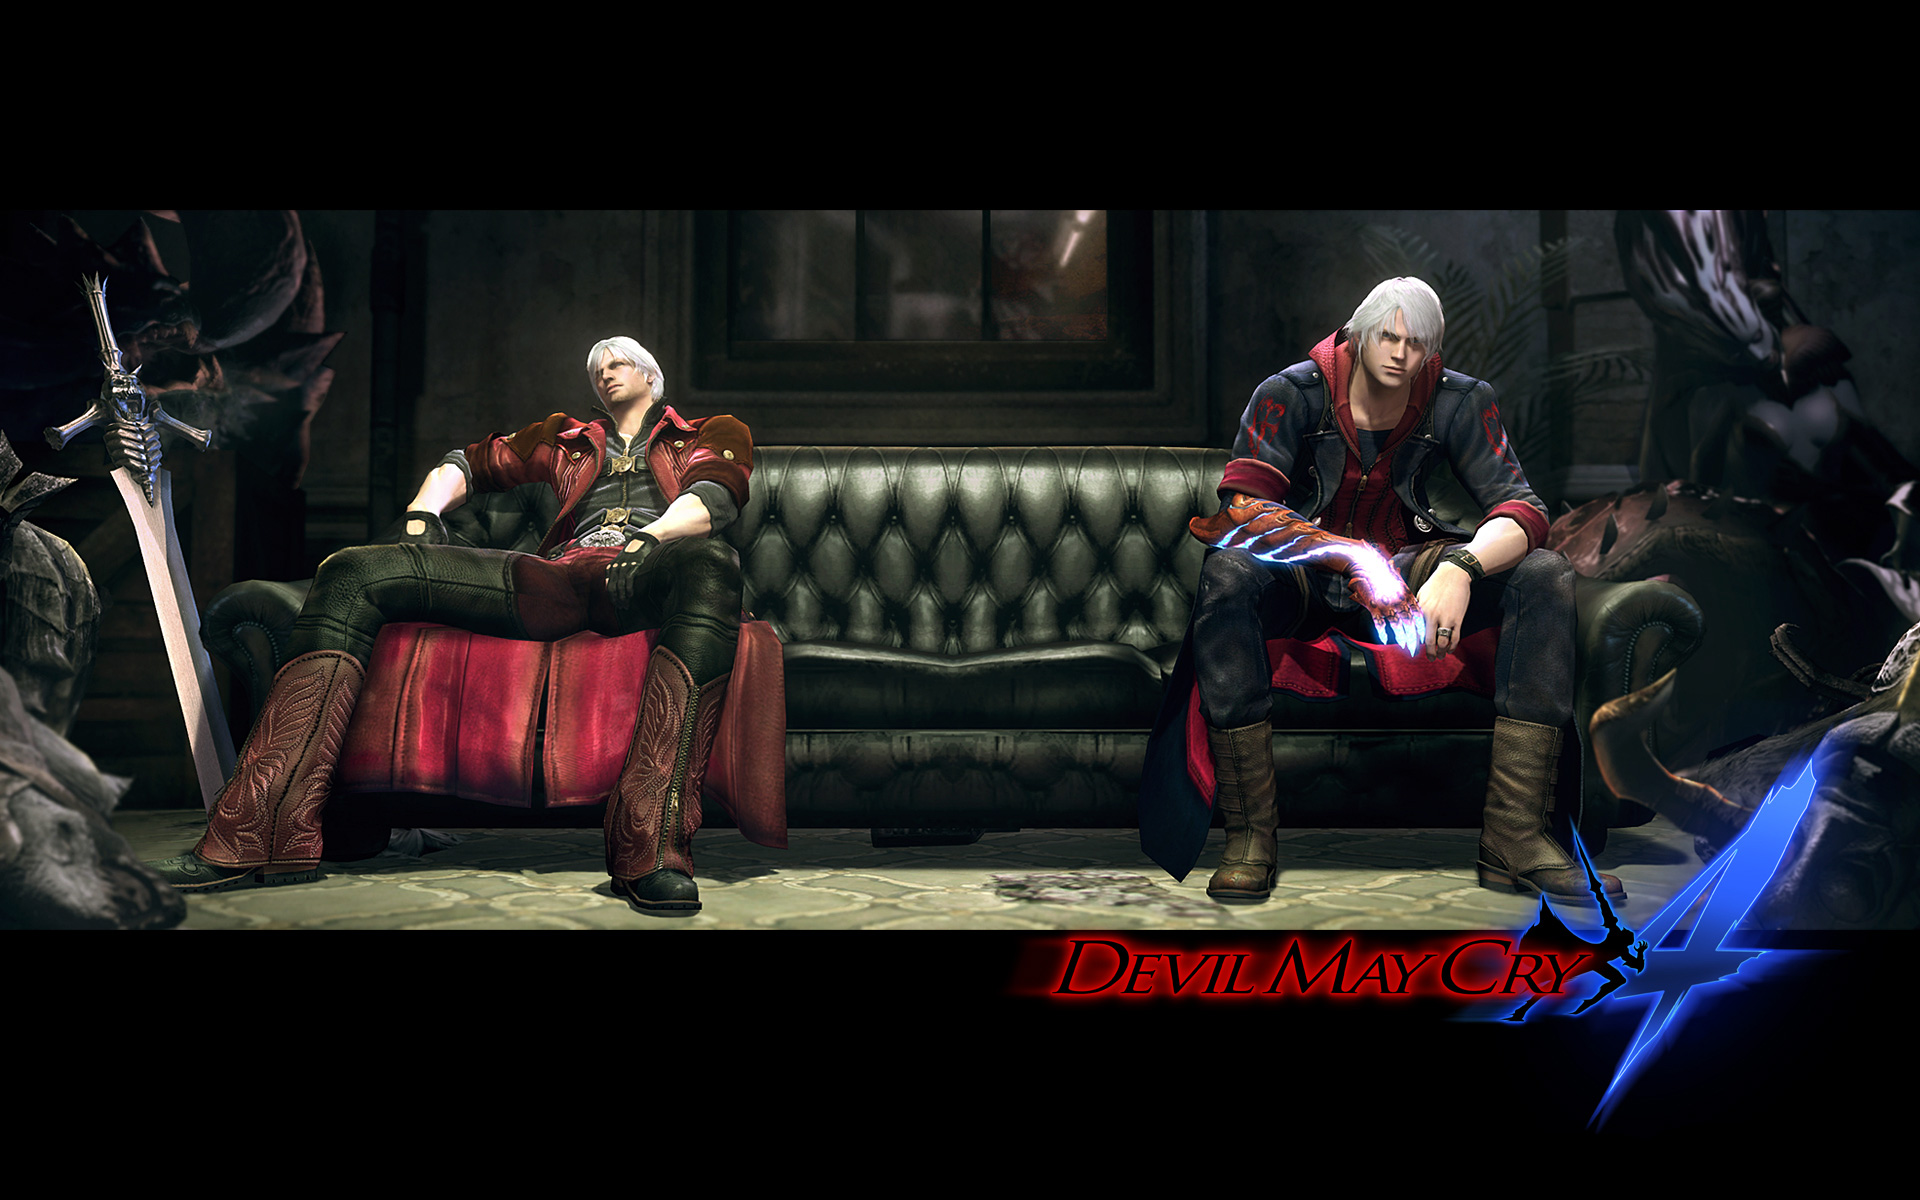 devil may cry 4, devil may cry, video game Aesthetic wallpaper